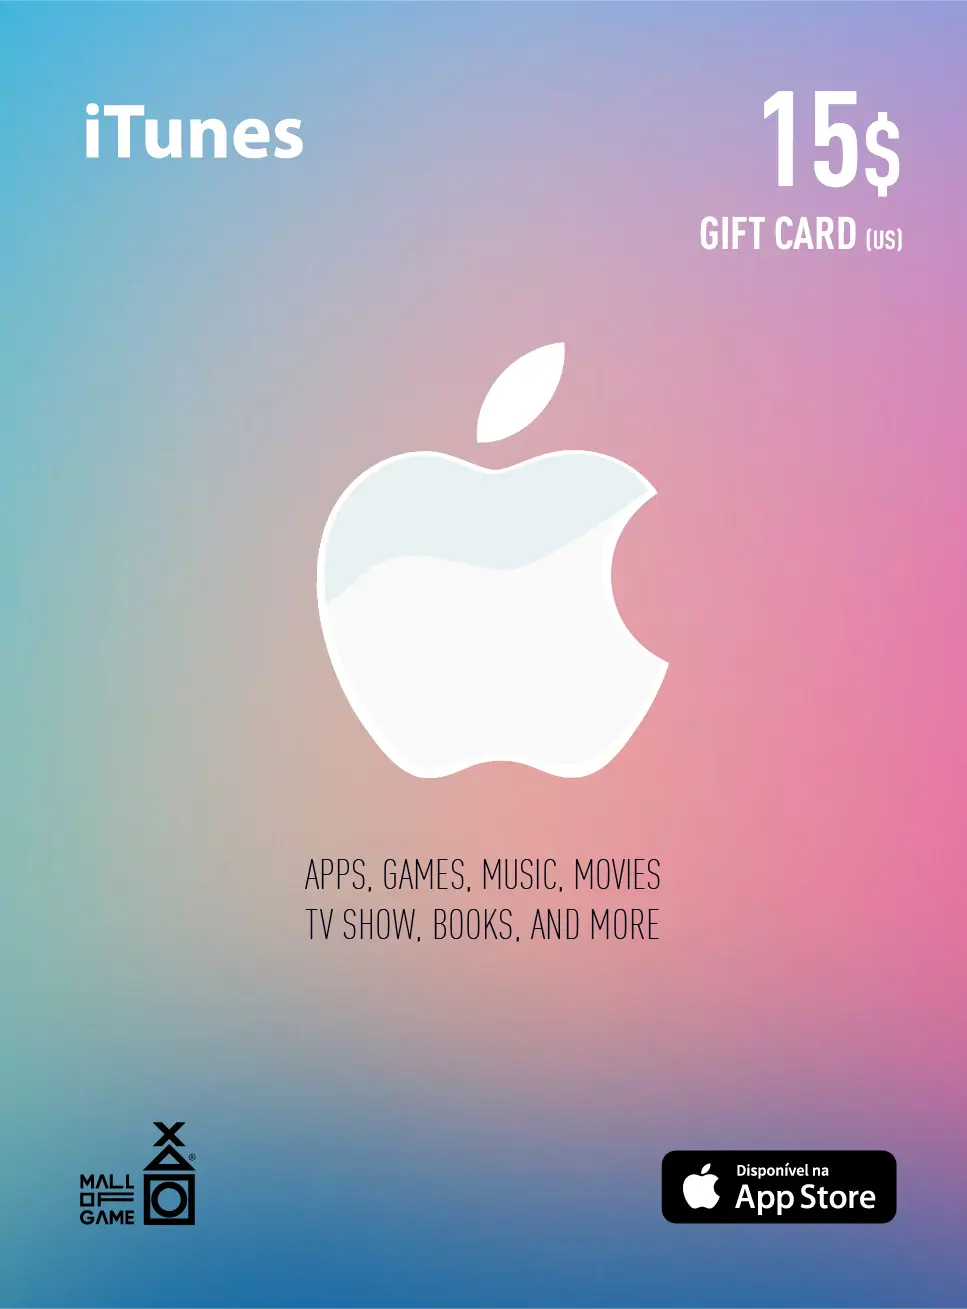  iTunes USD15 Gift Card (US)